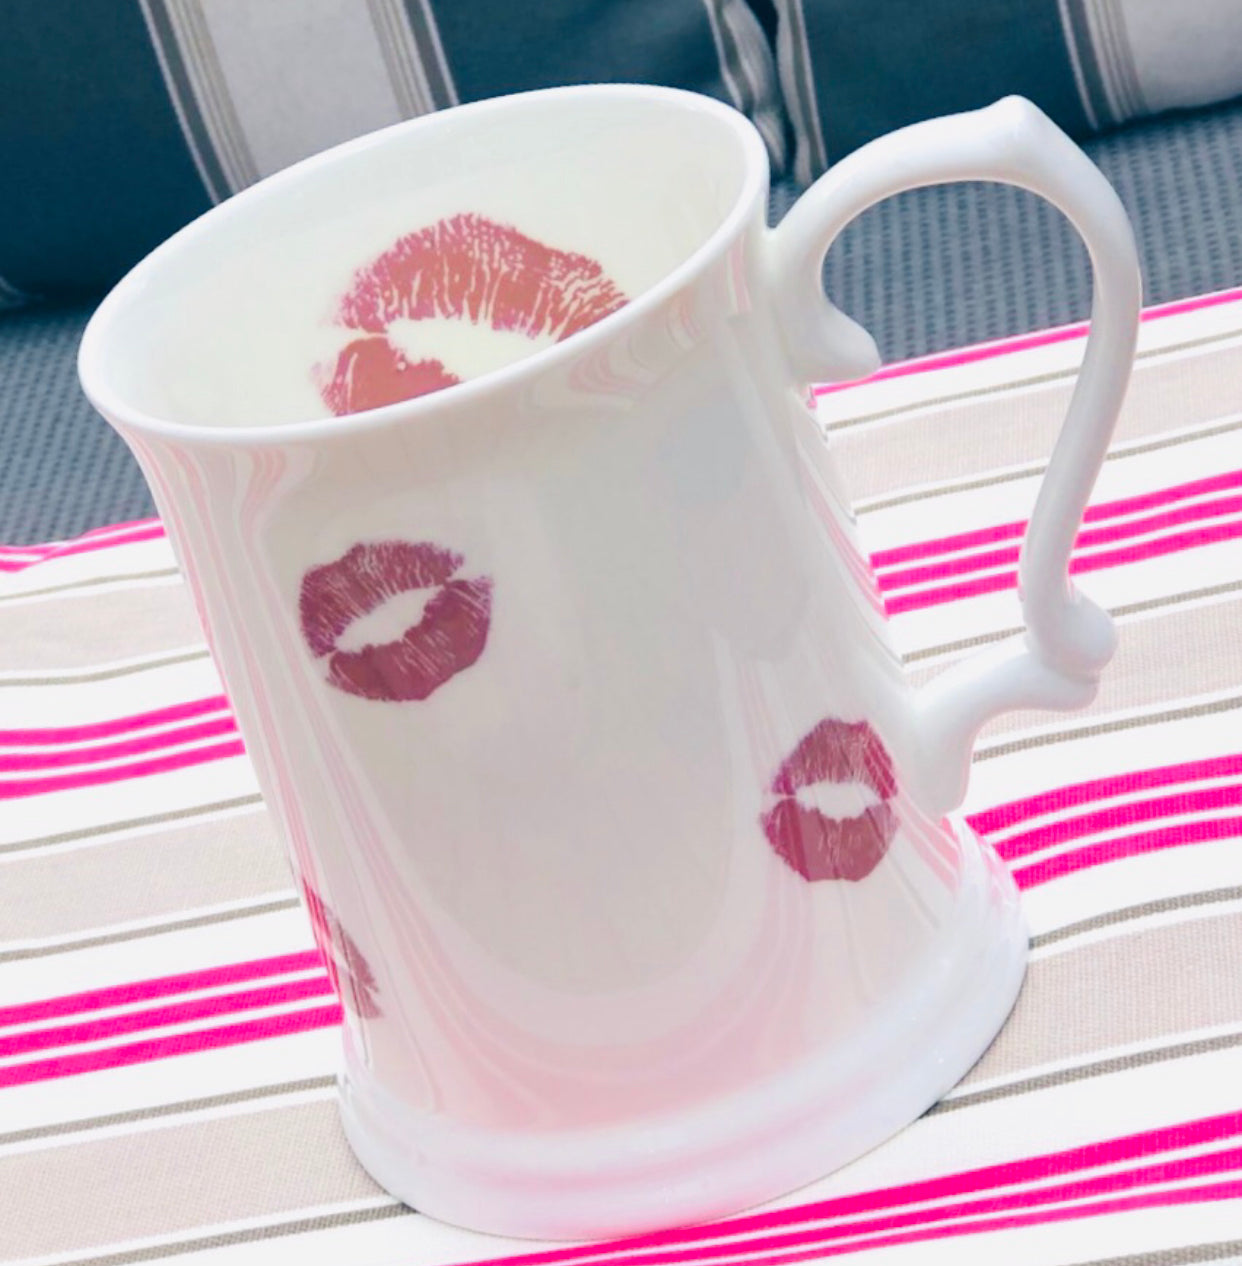 Tits 'n' Arse Tea Cup & Saucer – Outlandish Creations